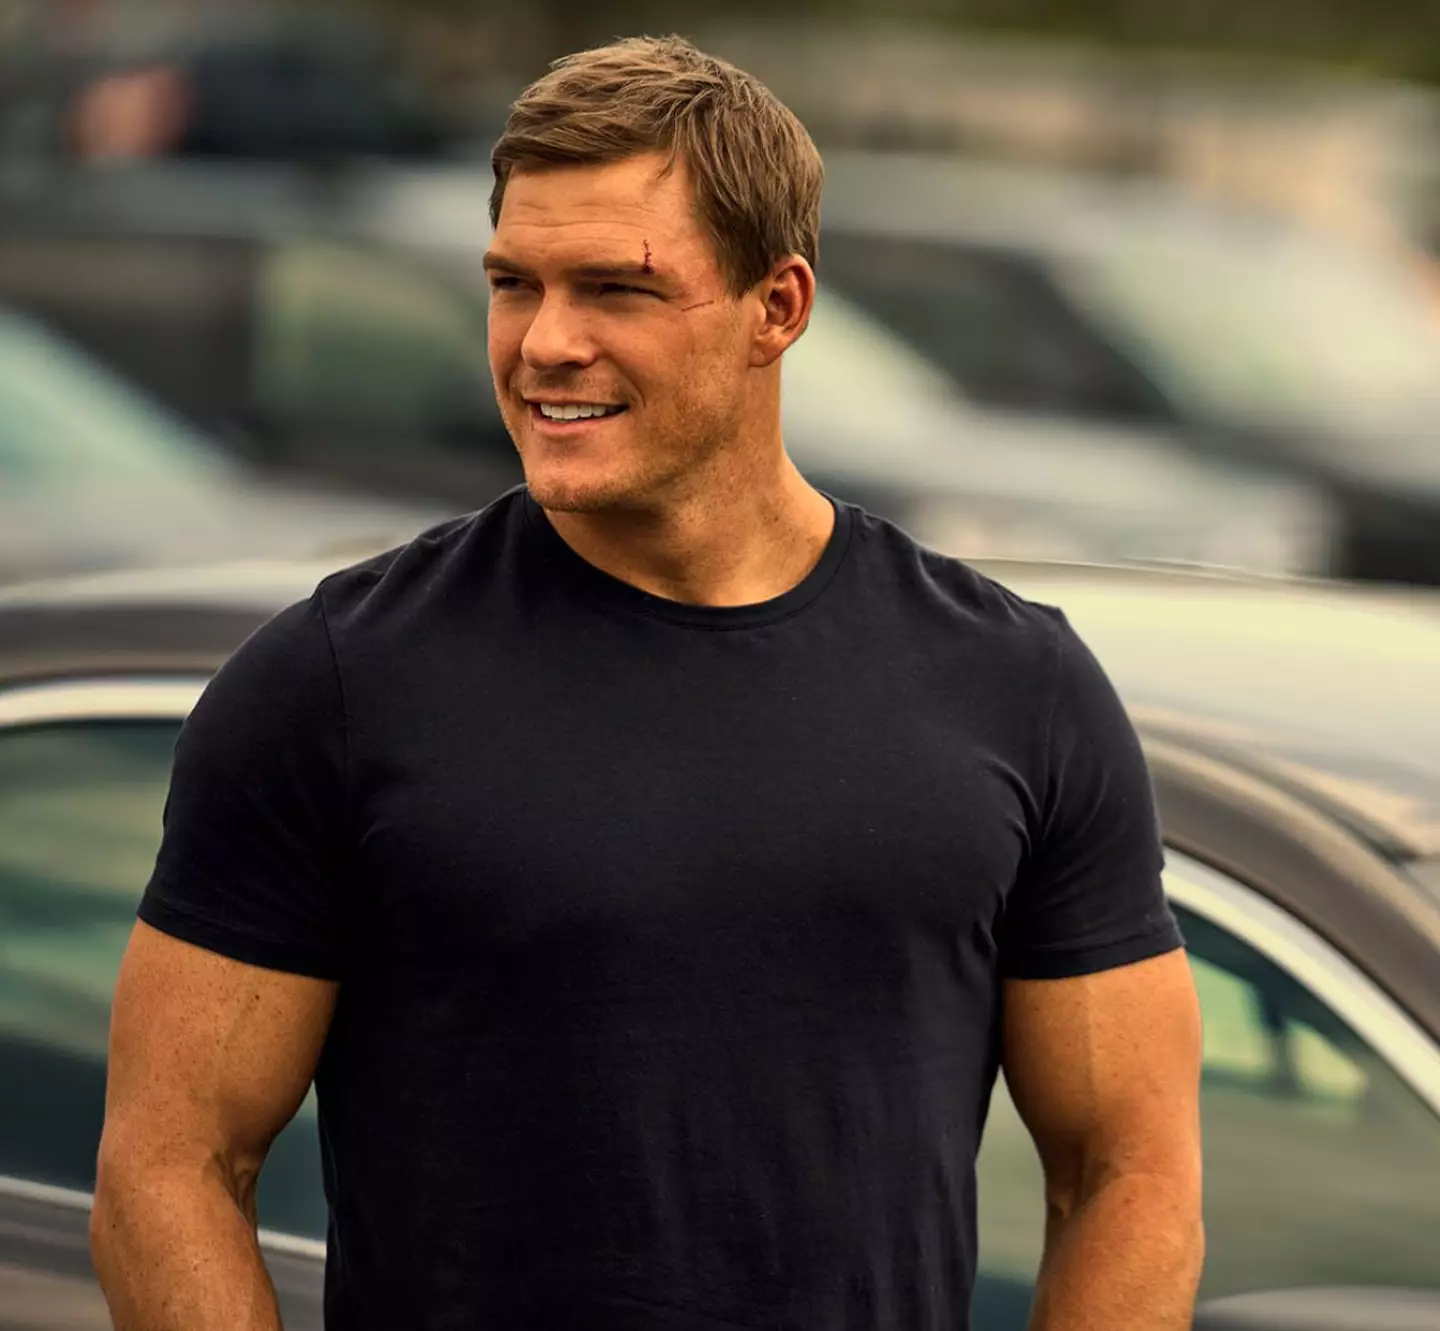 Alan Ritchson has to be fit for the stunts and action in the show.